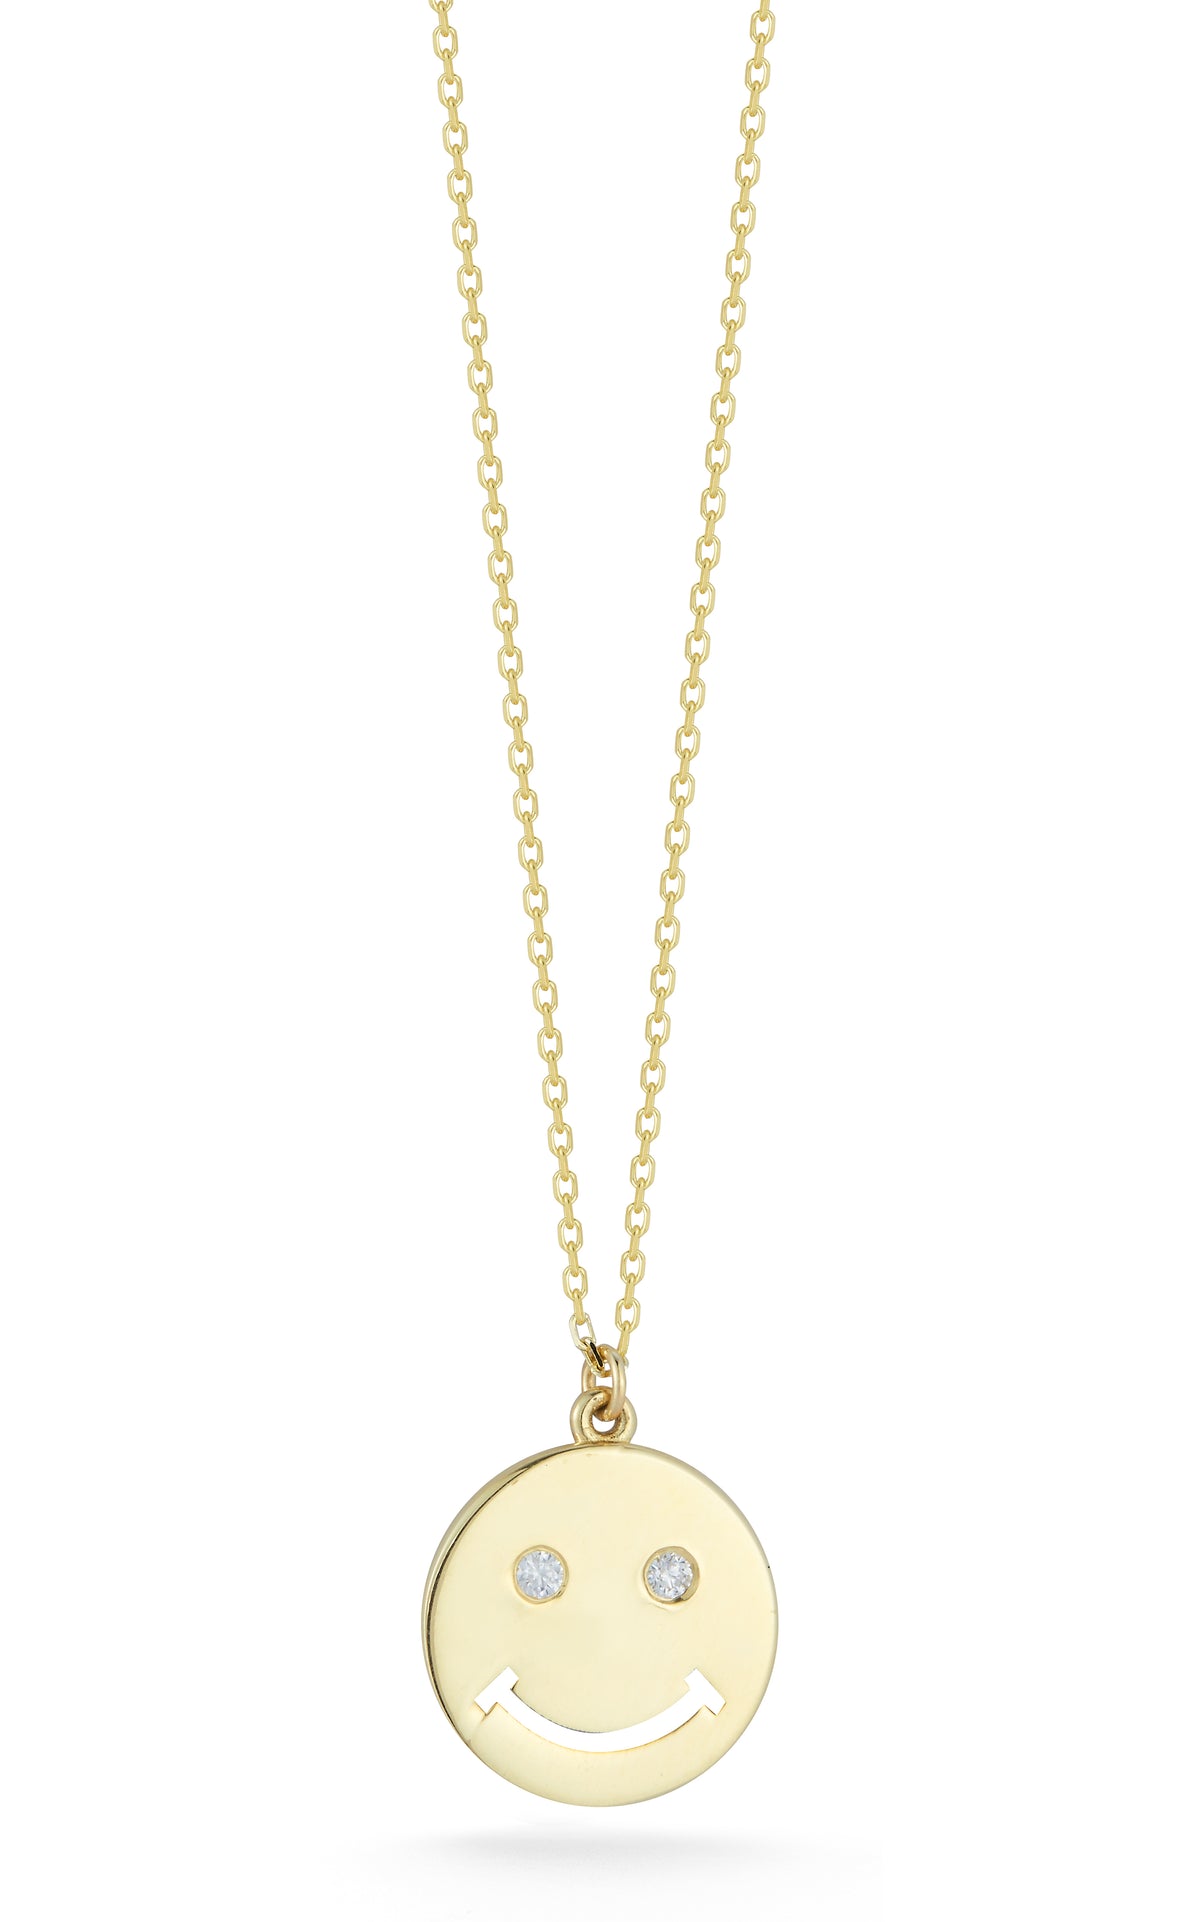 Smiley Face Diamond Pendant in 14k/18k Gold | Uverly - UVERLY